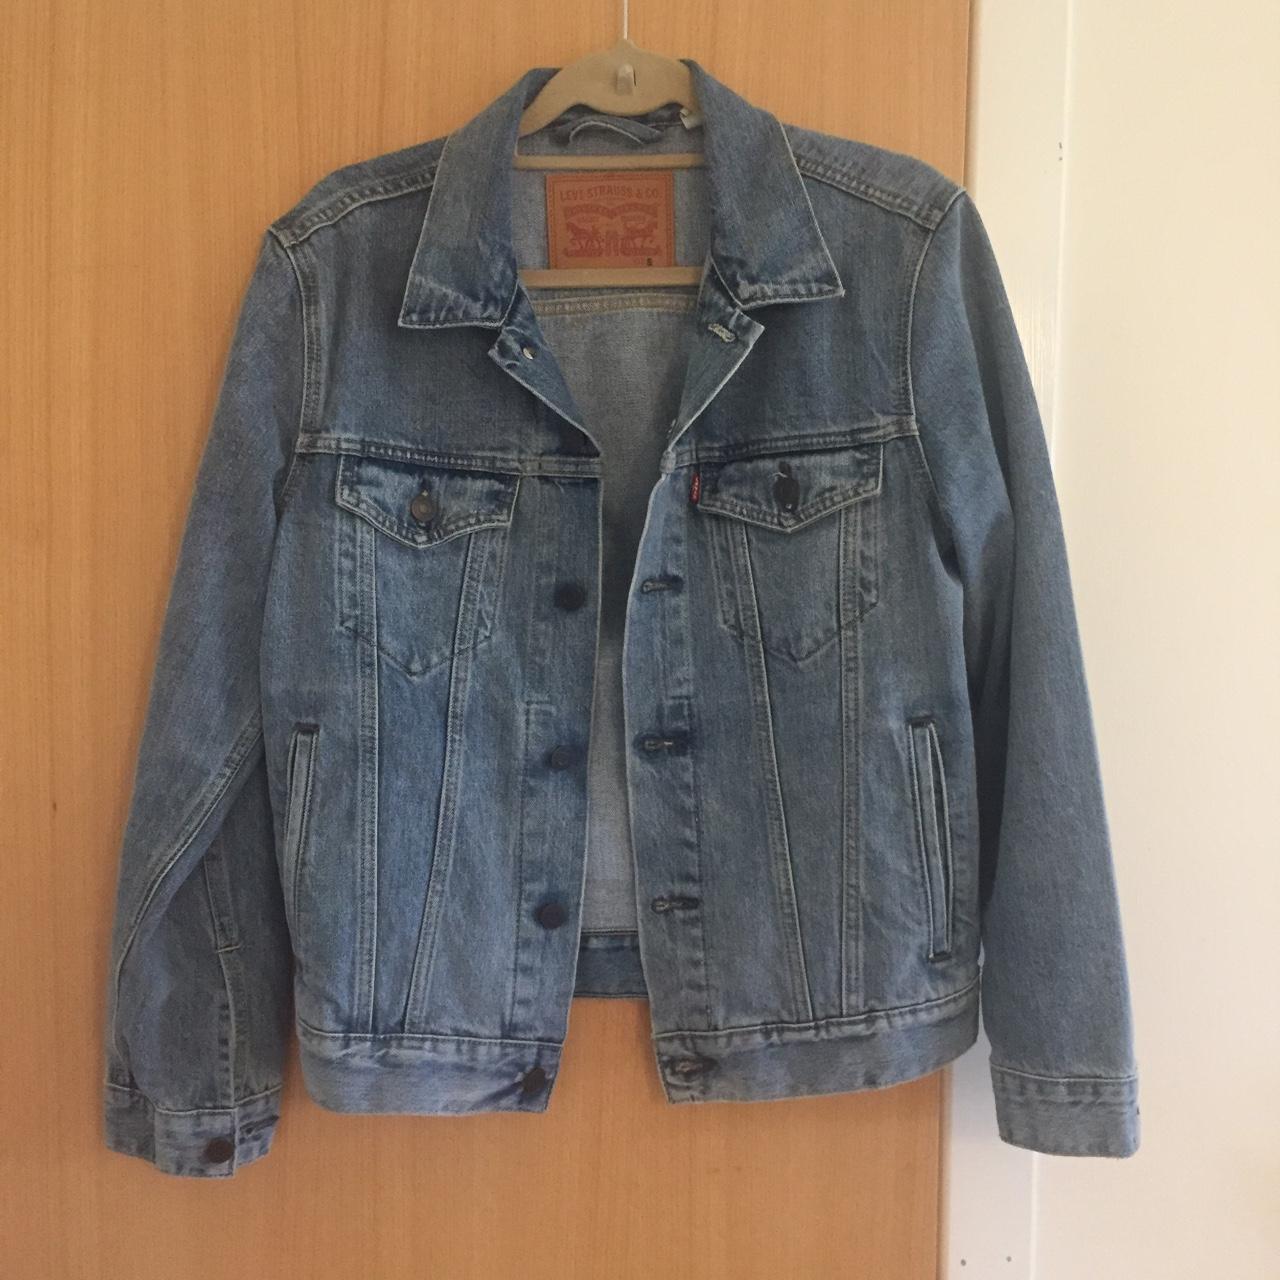 Levi’s denim jacket. Size S. never worn and in... - Depop